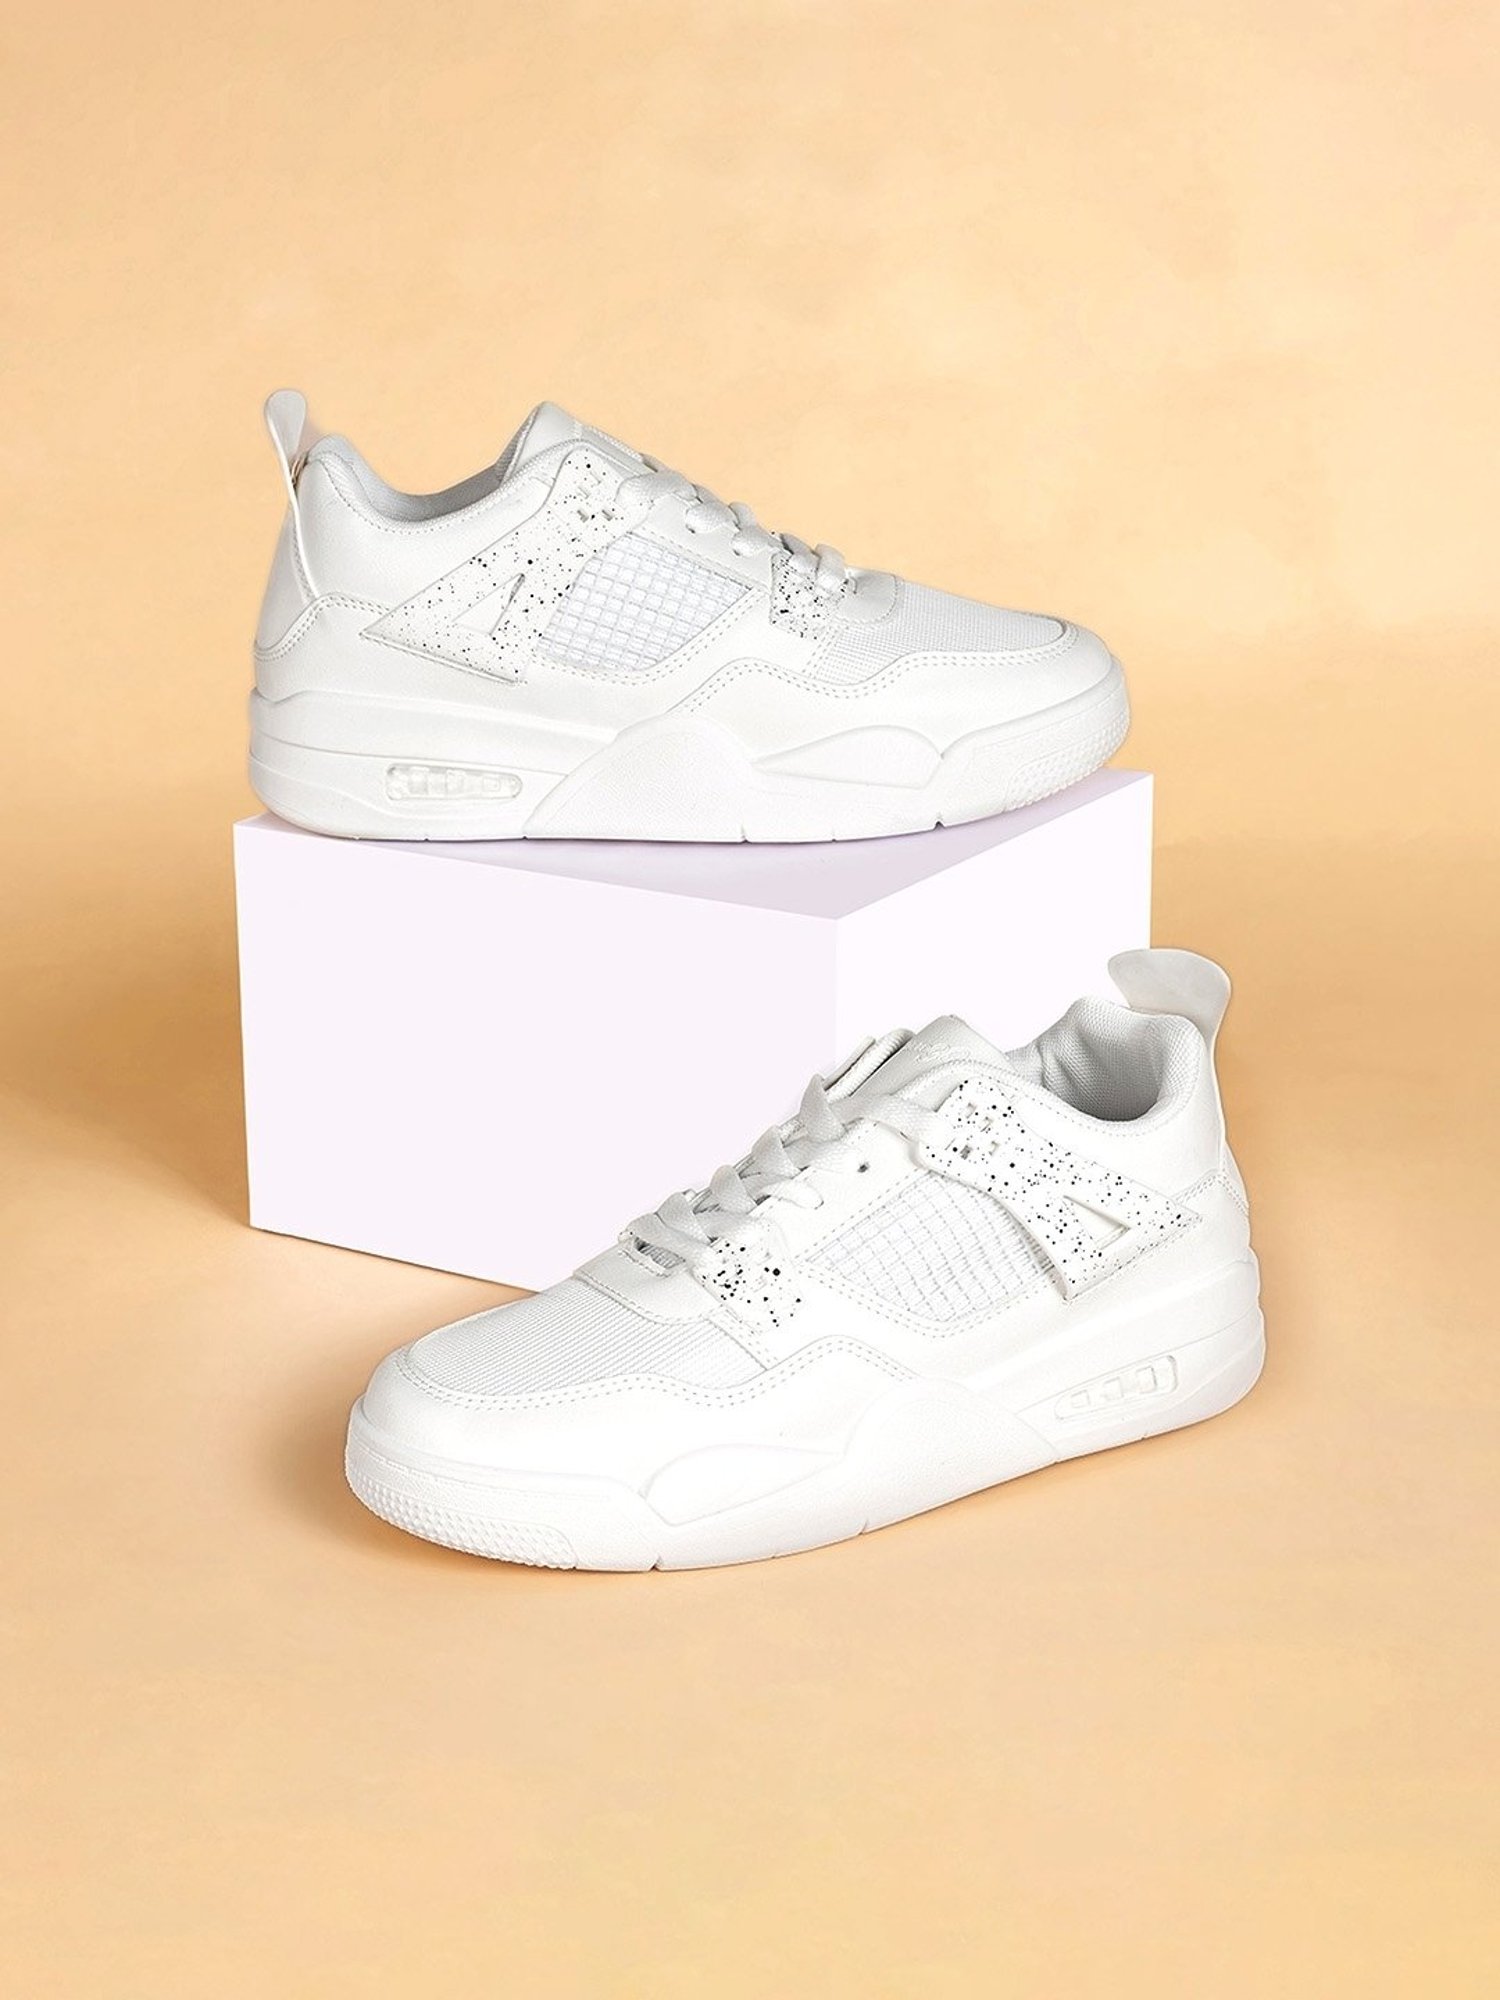 White Mesh Casual Women Sport Shoes - Selling Fast at Pantaloons.com